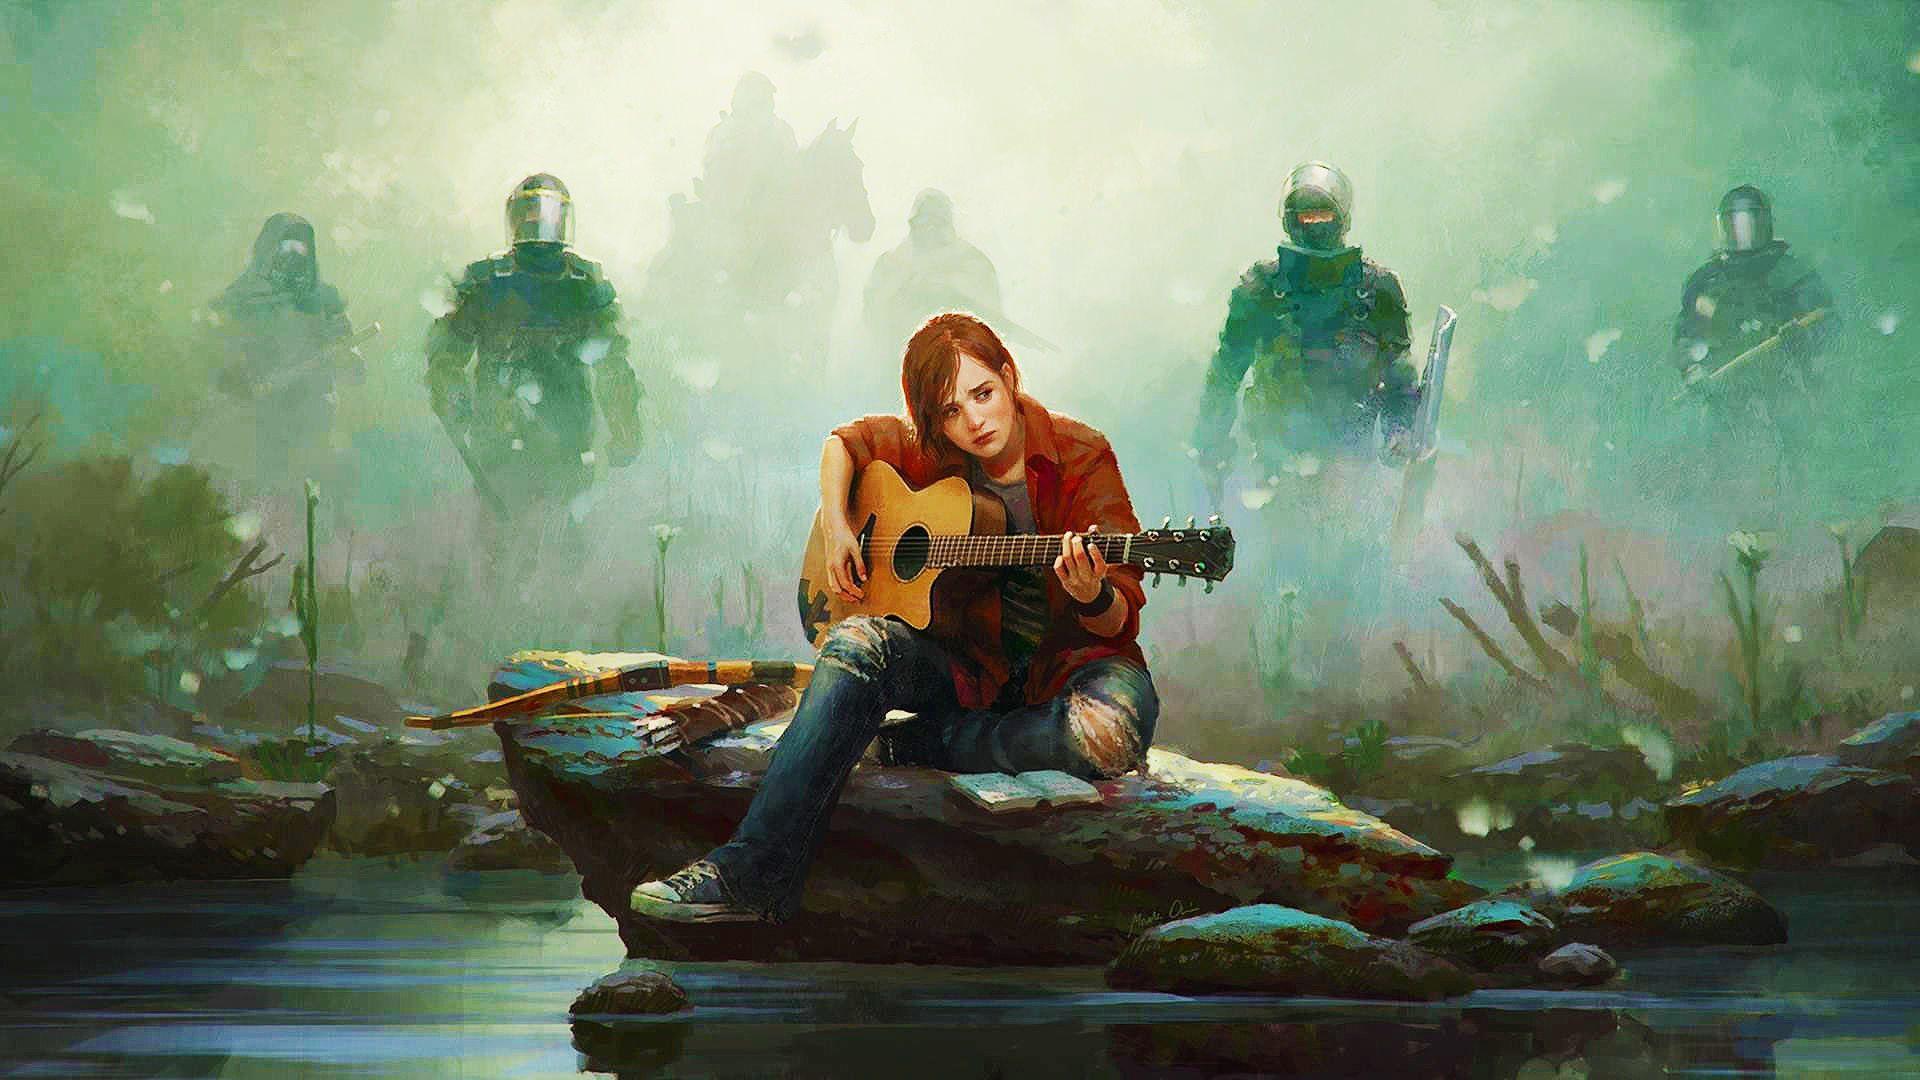 The Last of Us PS4 Wallpaper